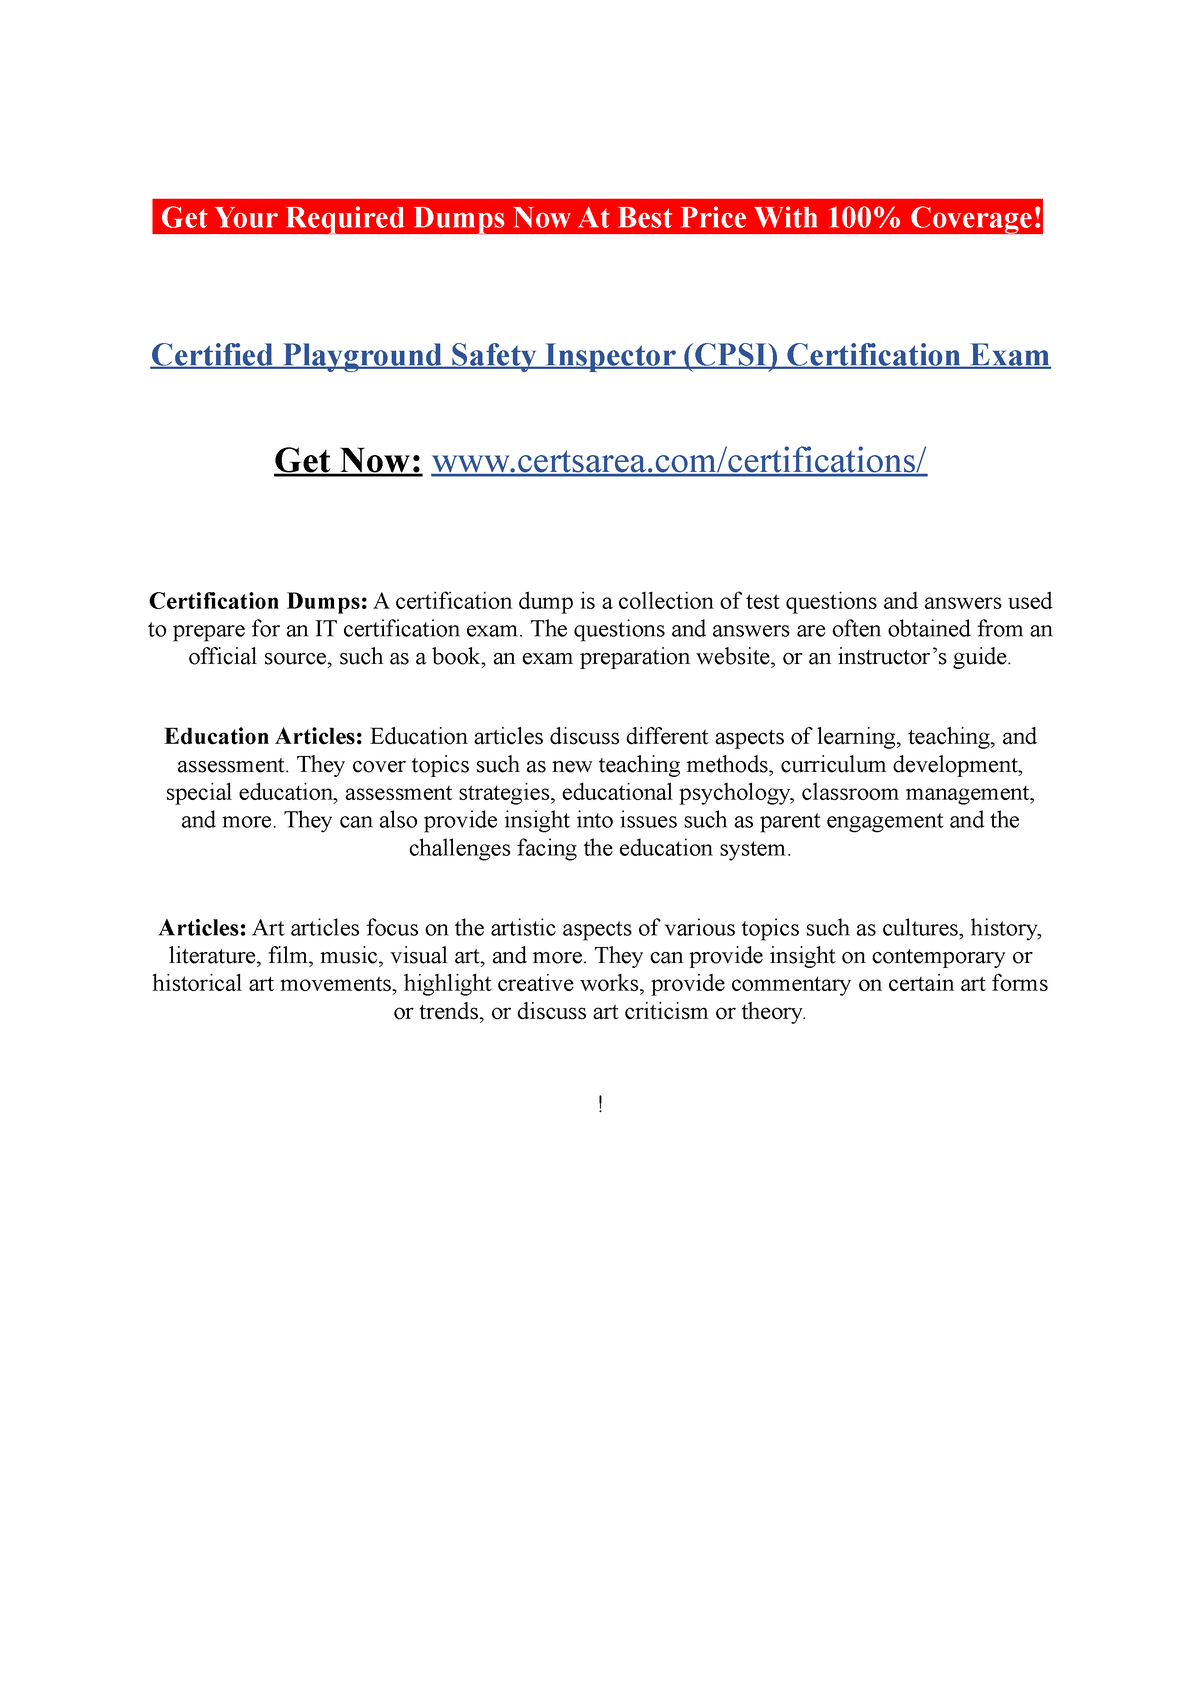 Certified Playground Safety Inspector (CPSI) Certification Exam Get